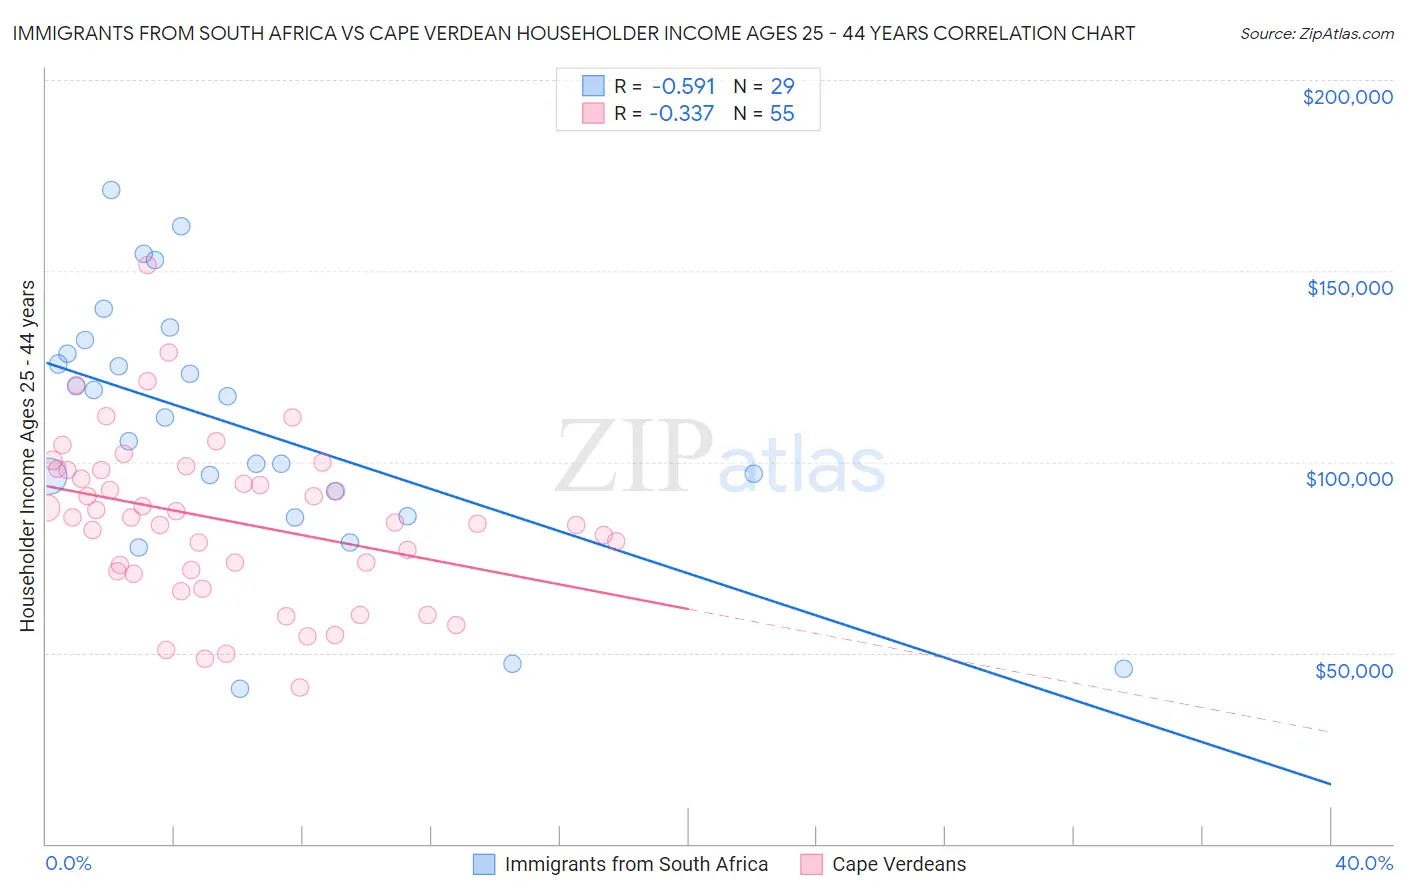 Immigrants from South Africa vs Cape Verdean Householder Income Ages 25 - 44 years